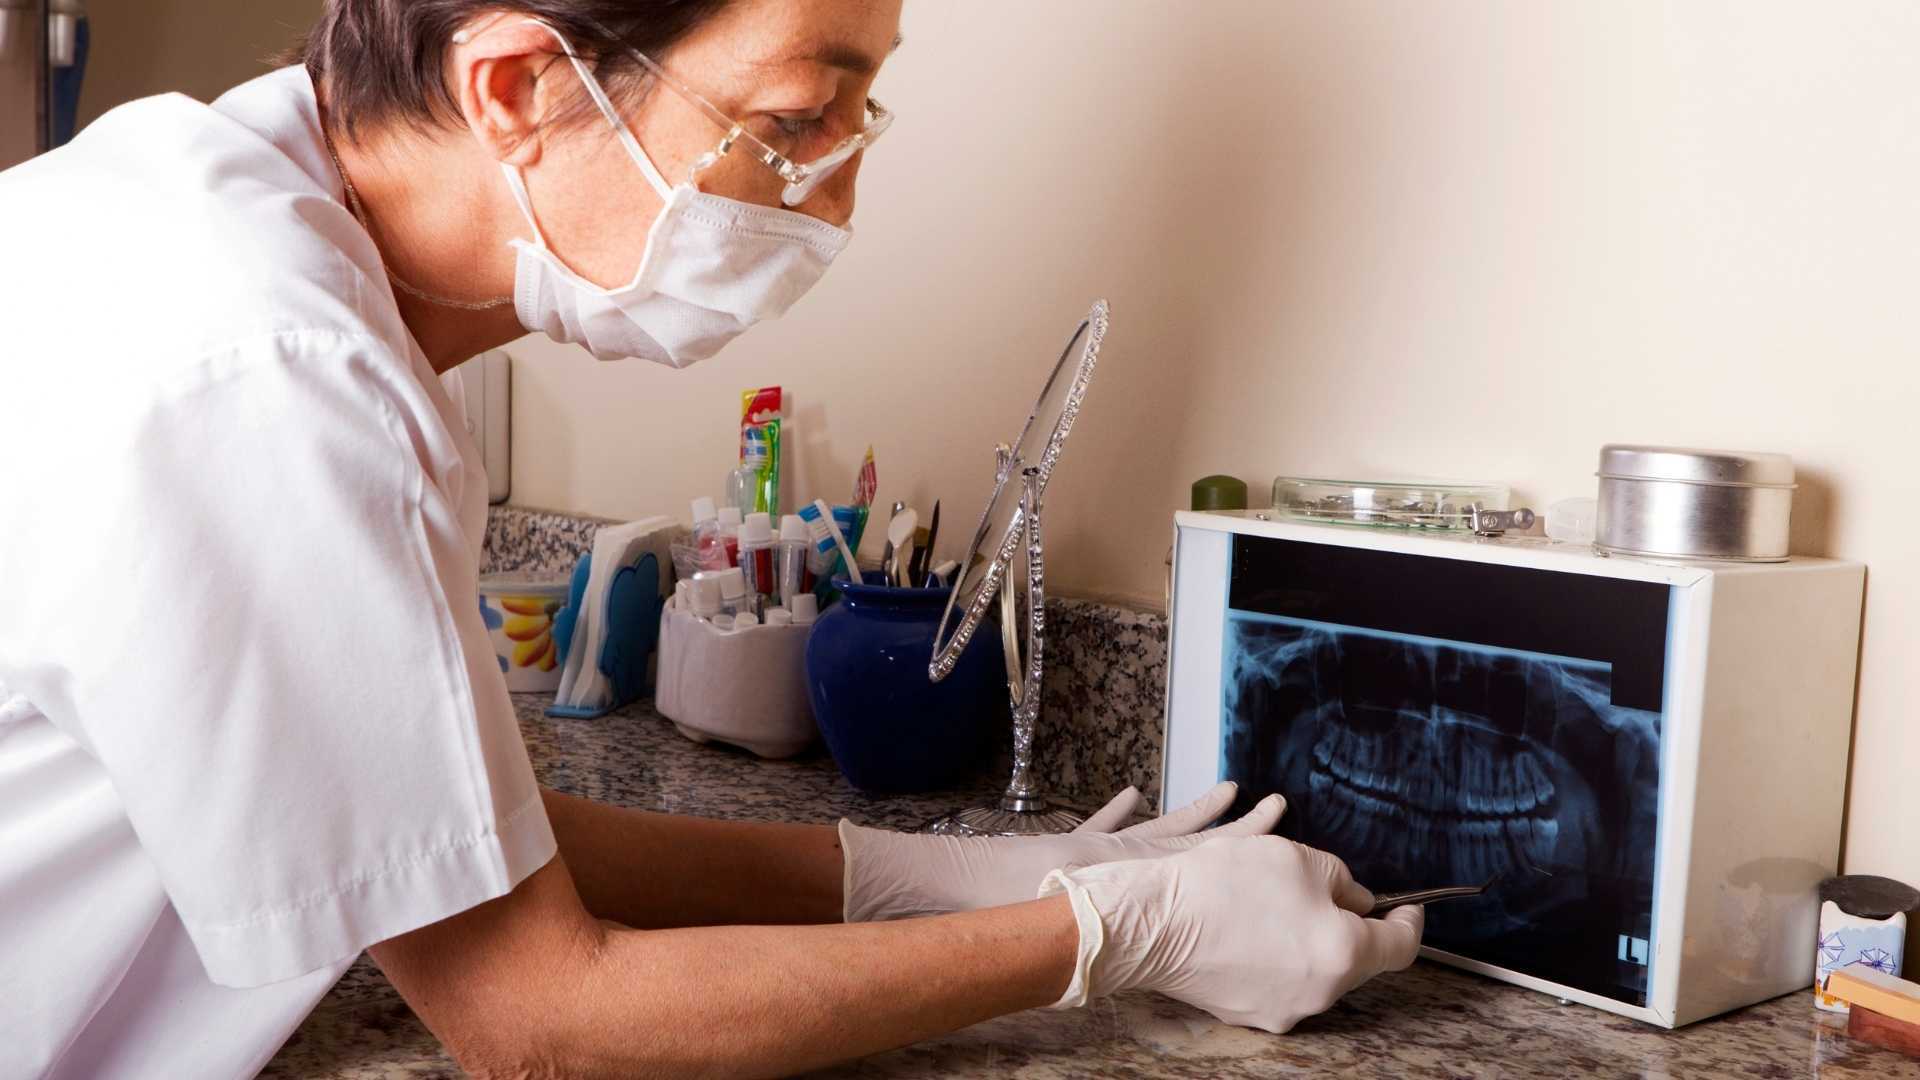 How often should dental x-rays be taken, and for how long?